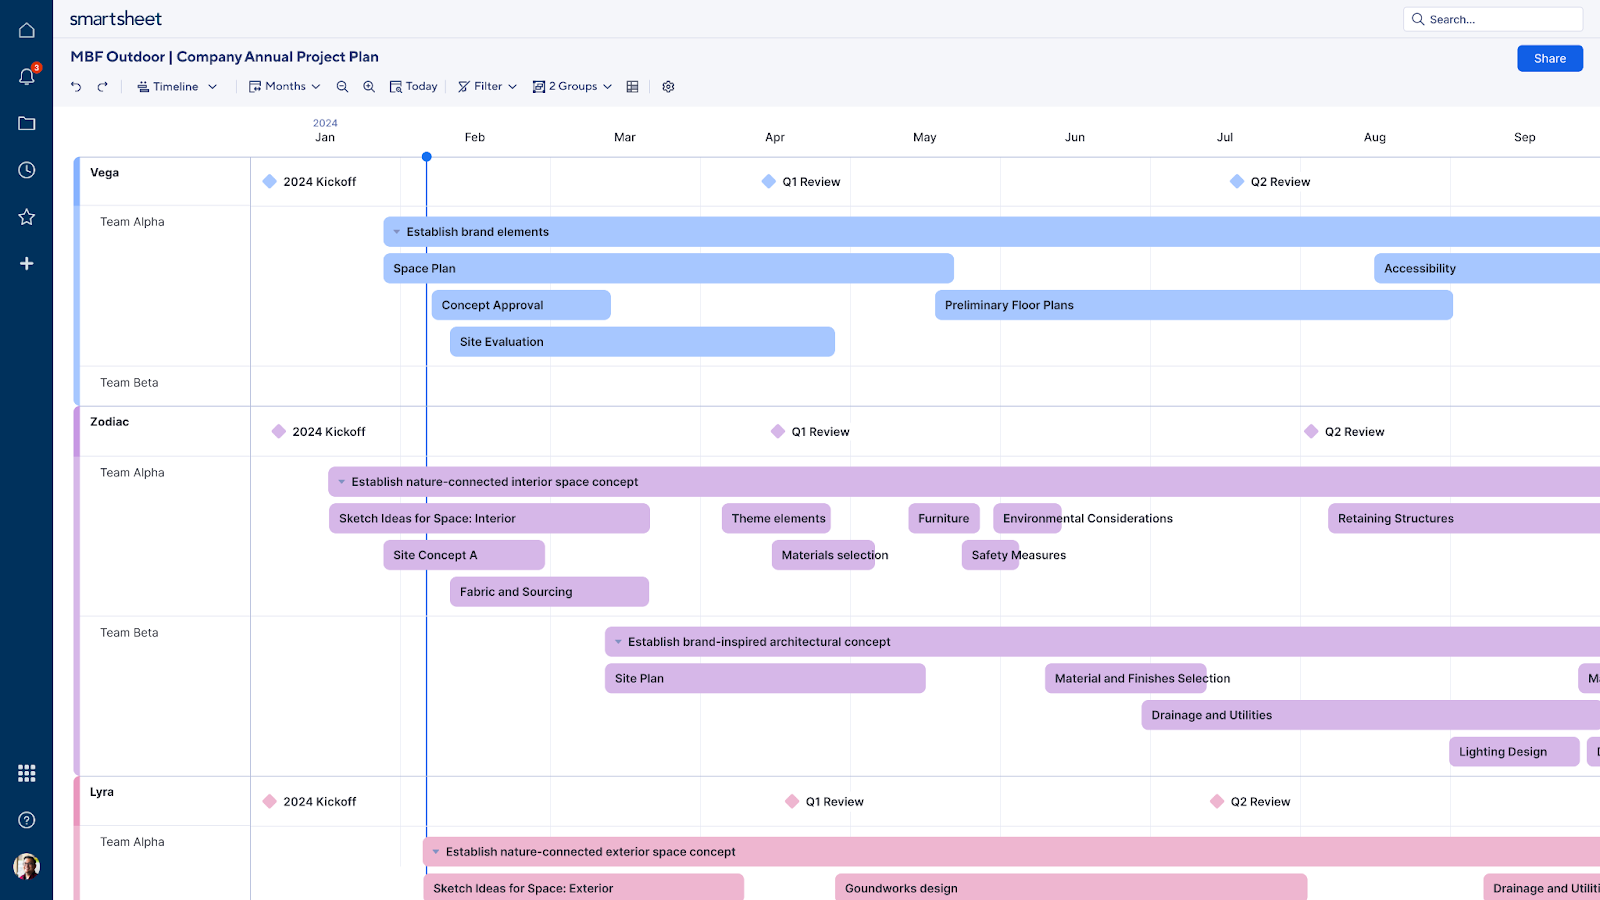 timeline view